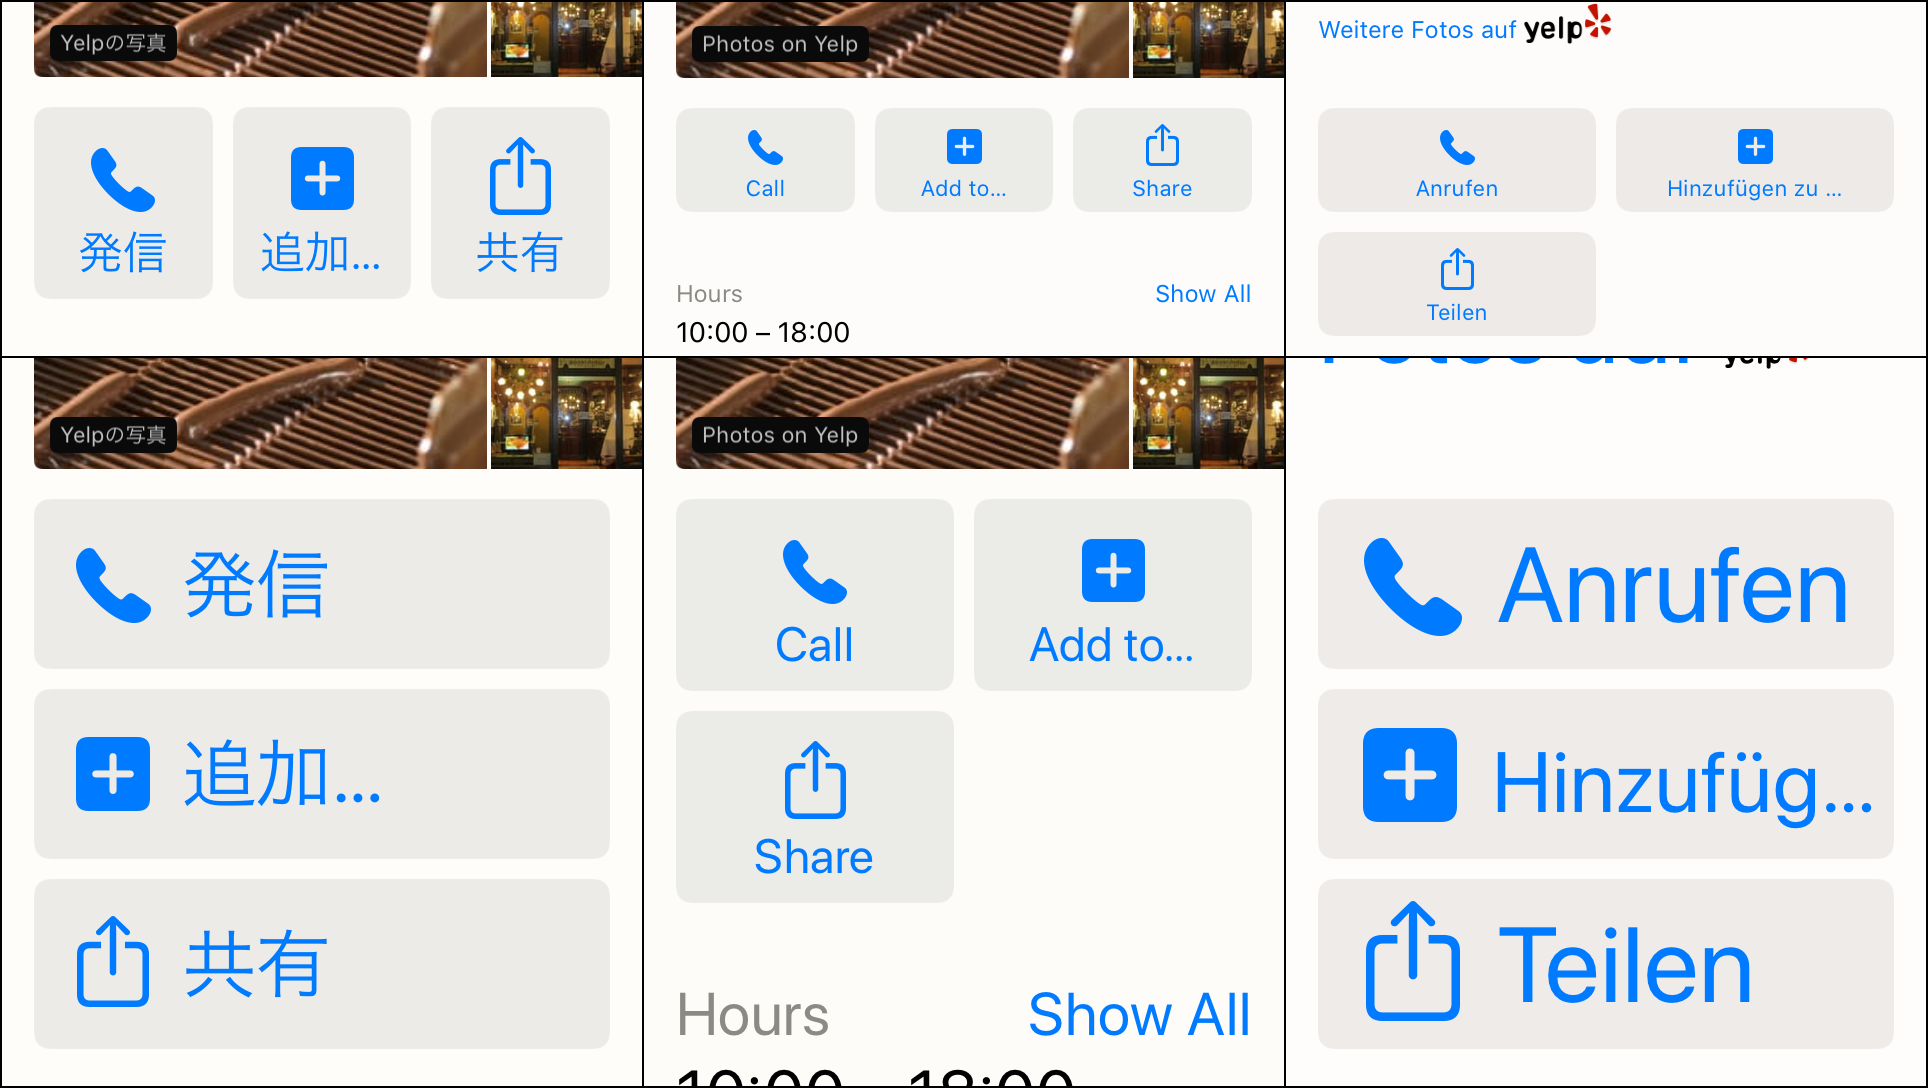 Composite screenshot of the Maps app showing the Call, Add to… and Share buttons.